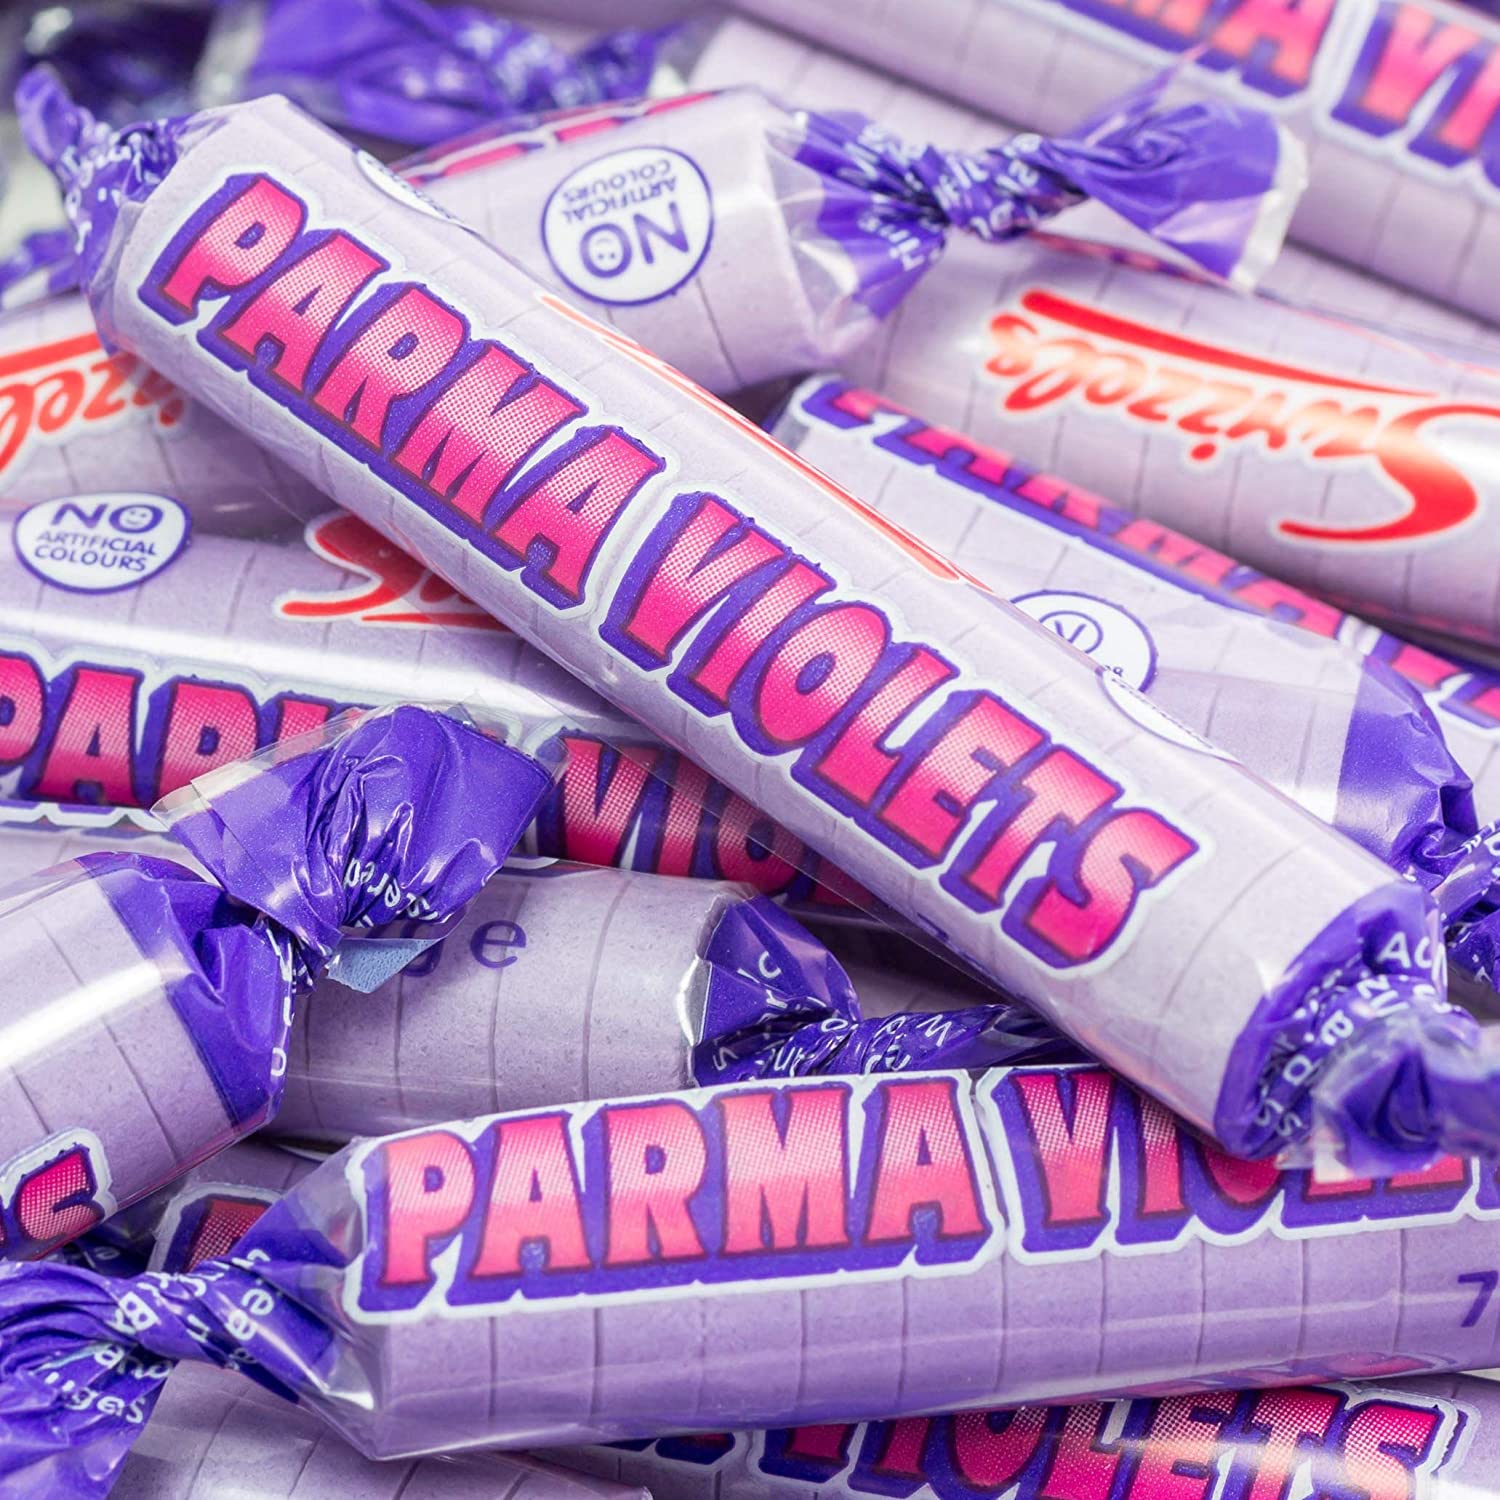 Parma Violets - a sweet from the 80s